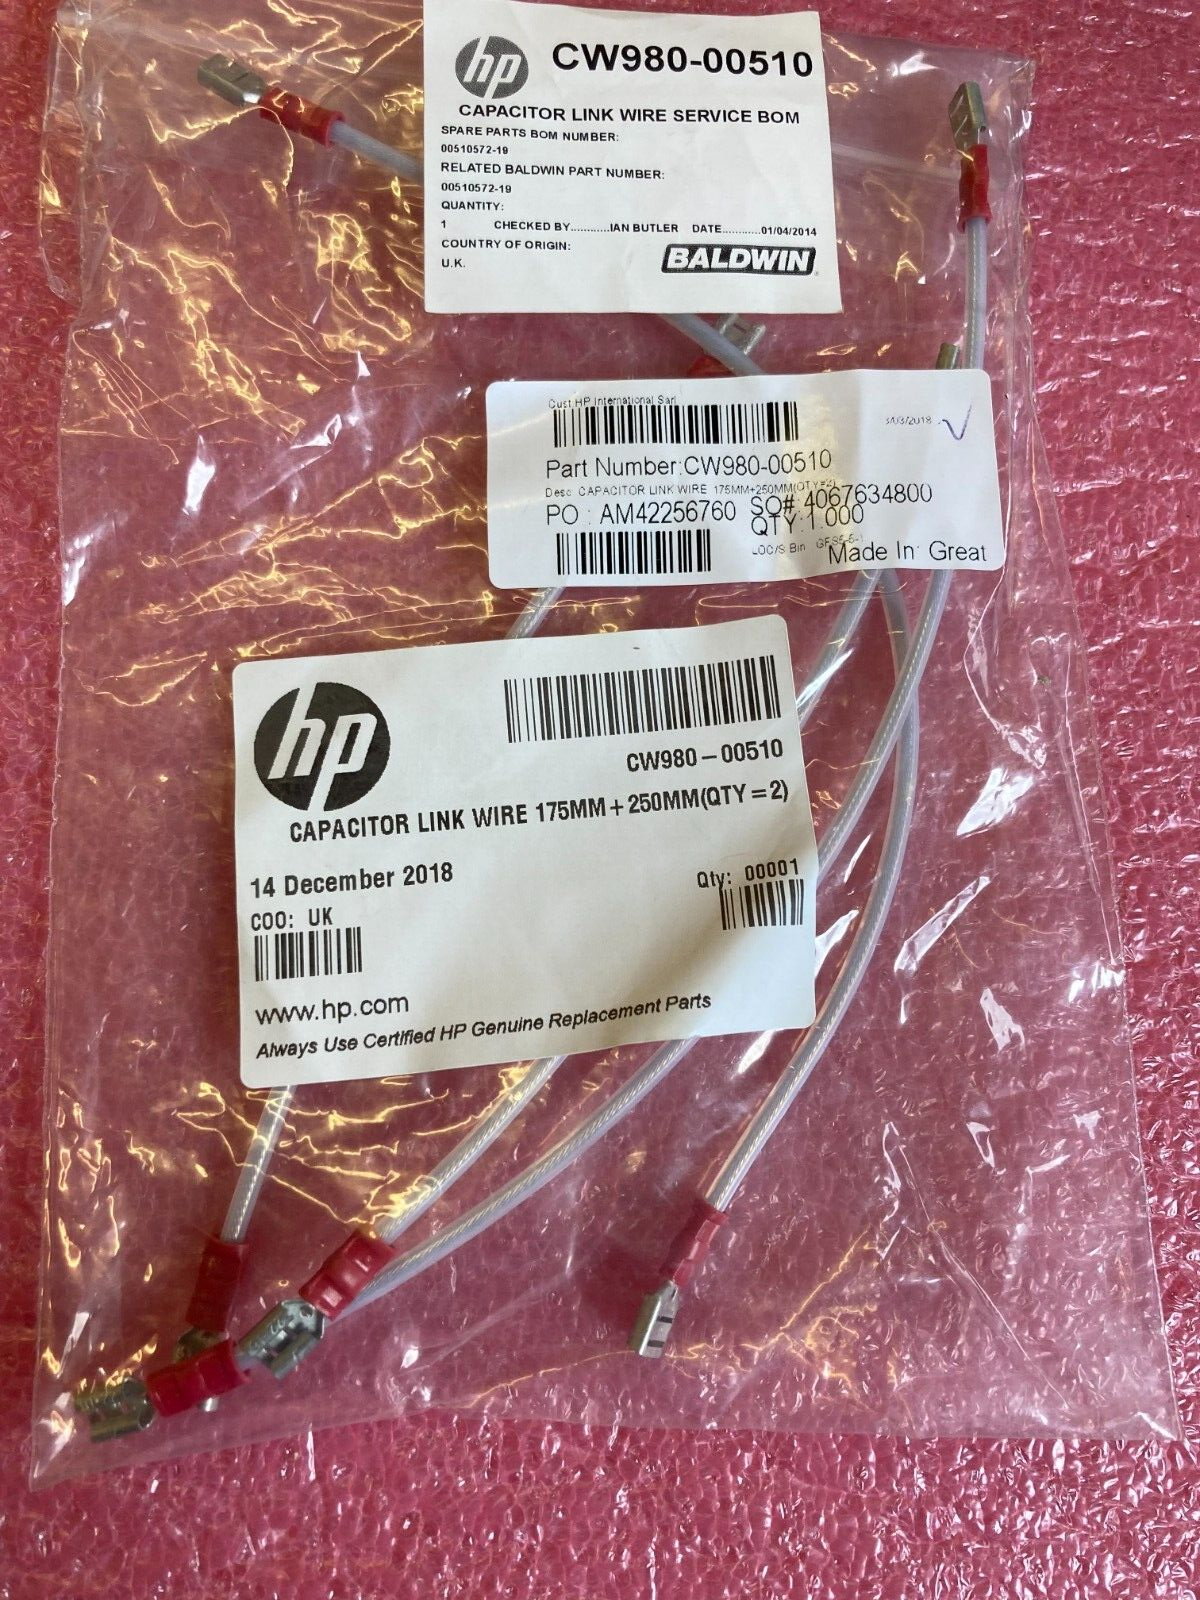 NEW HP CW980-00510 CAPACITOR LINK WIRE 175MM+250MM(QTY=2) SCITEX PRESS VARIOUS